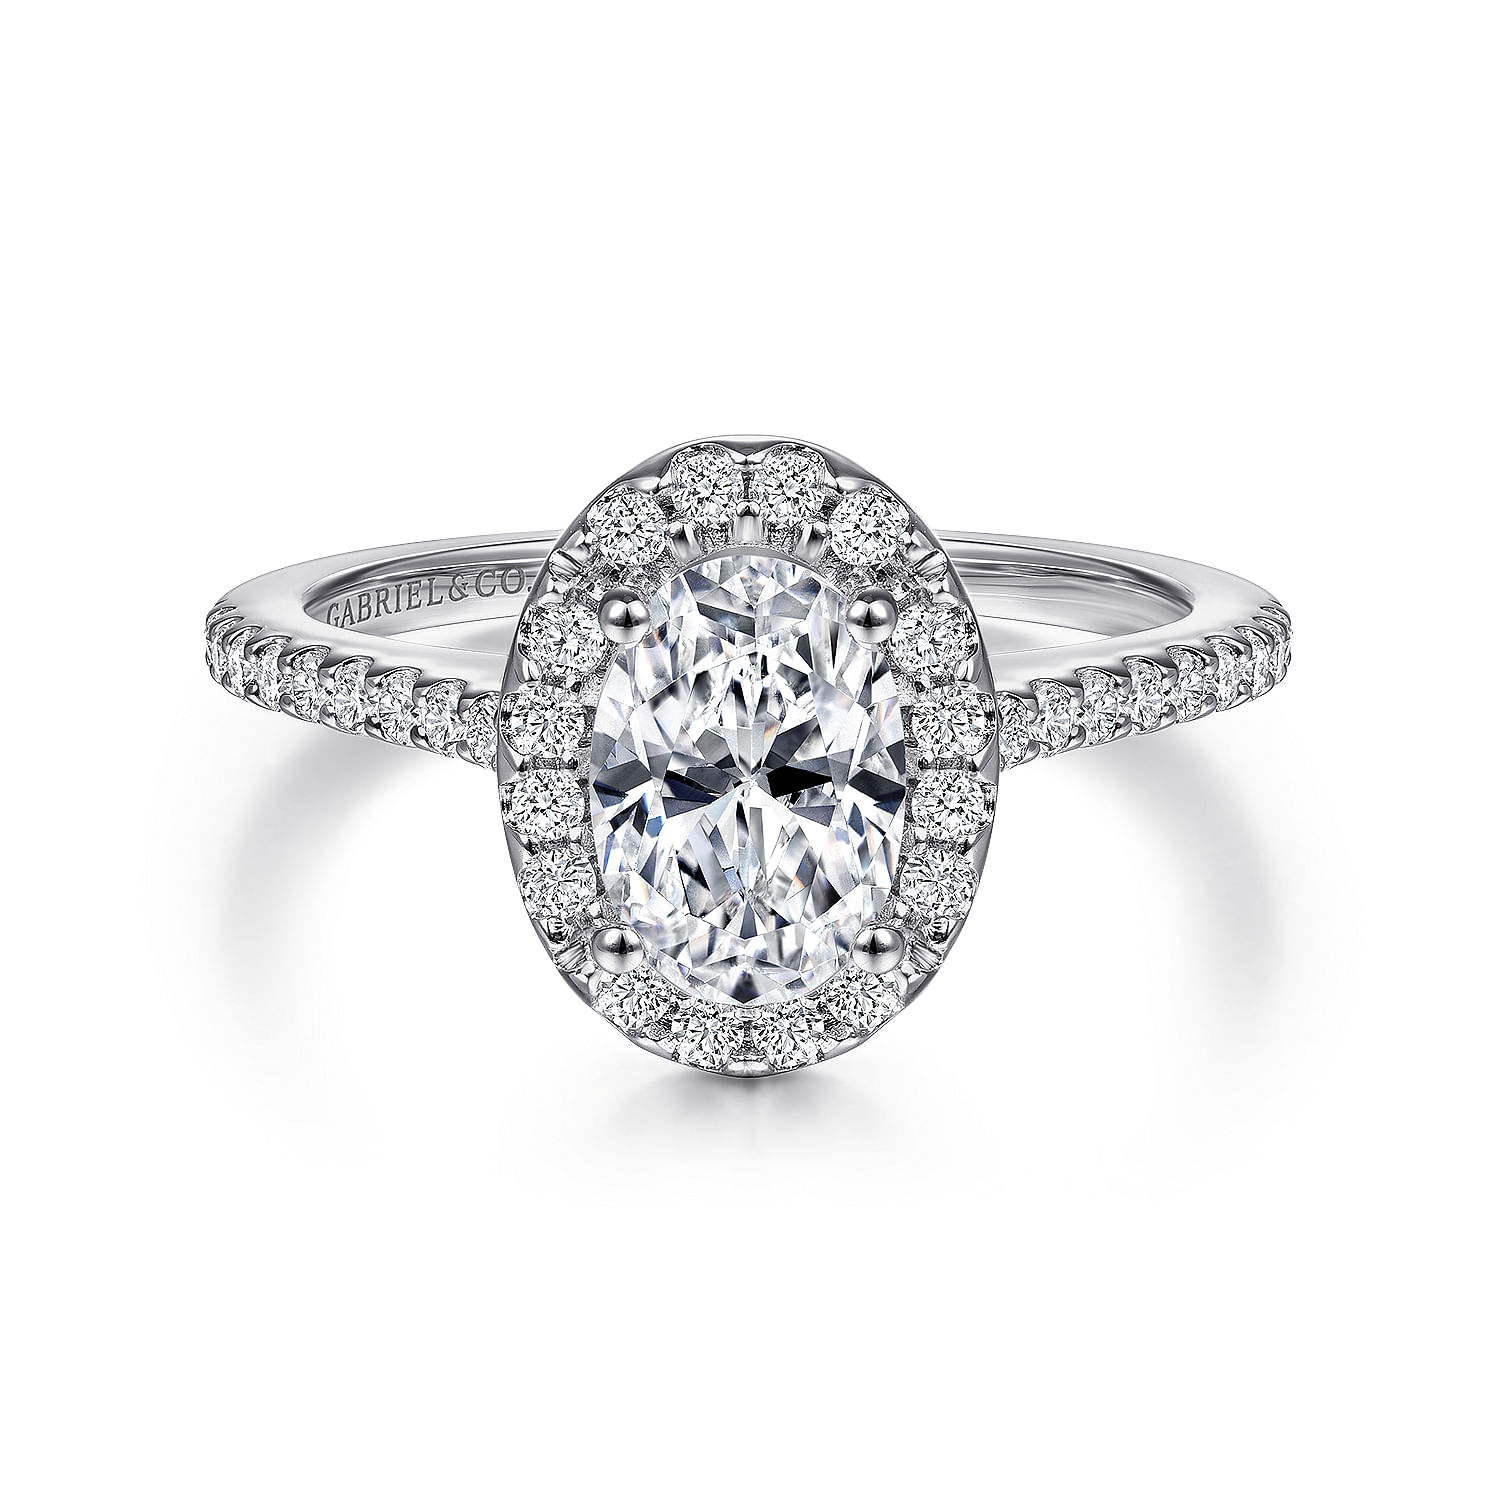 Carly - 14K White Gold Oval Halo Diamond Engagement Ring